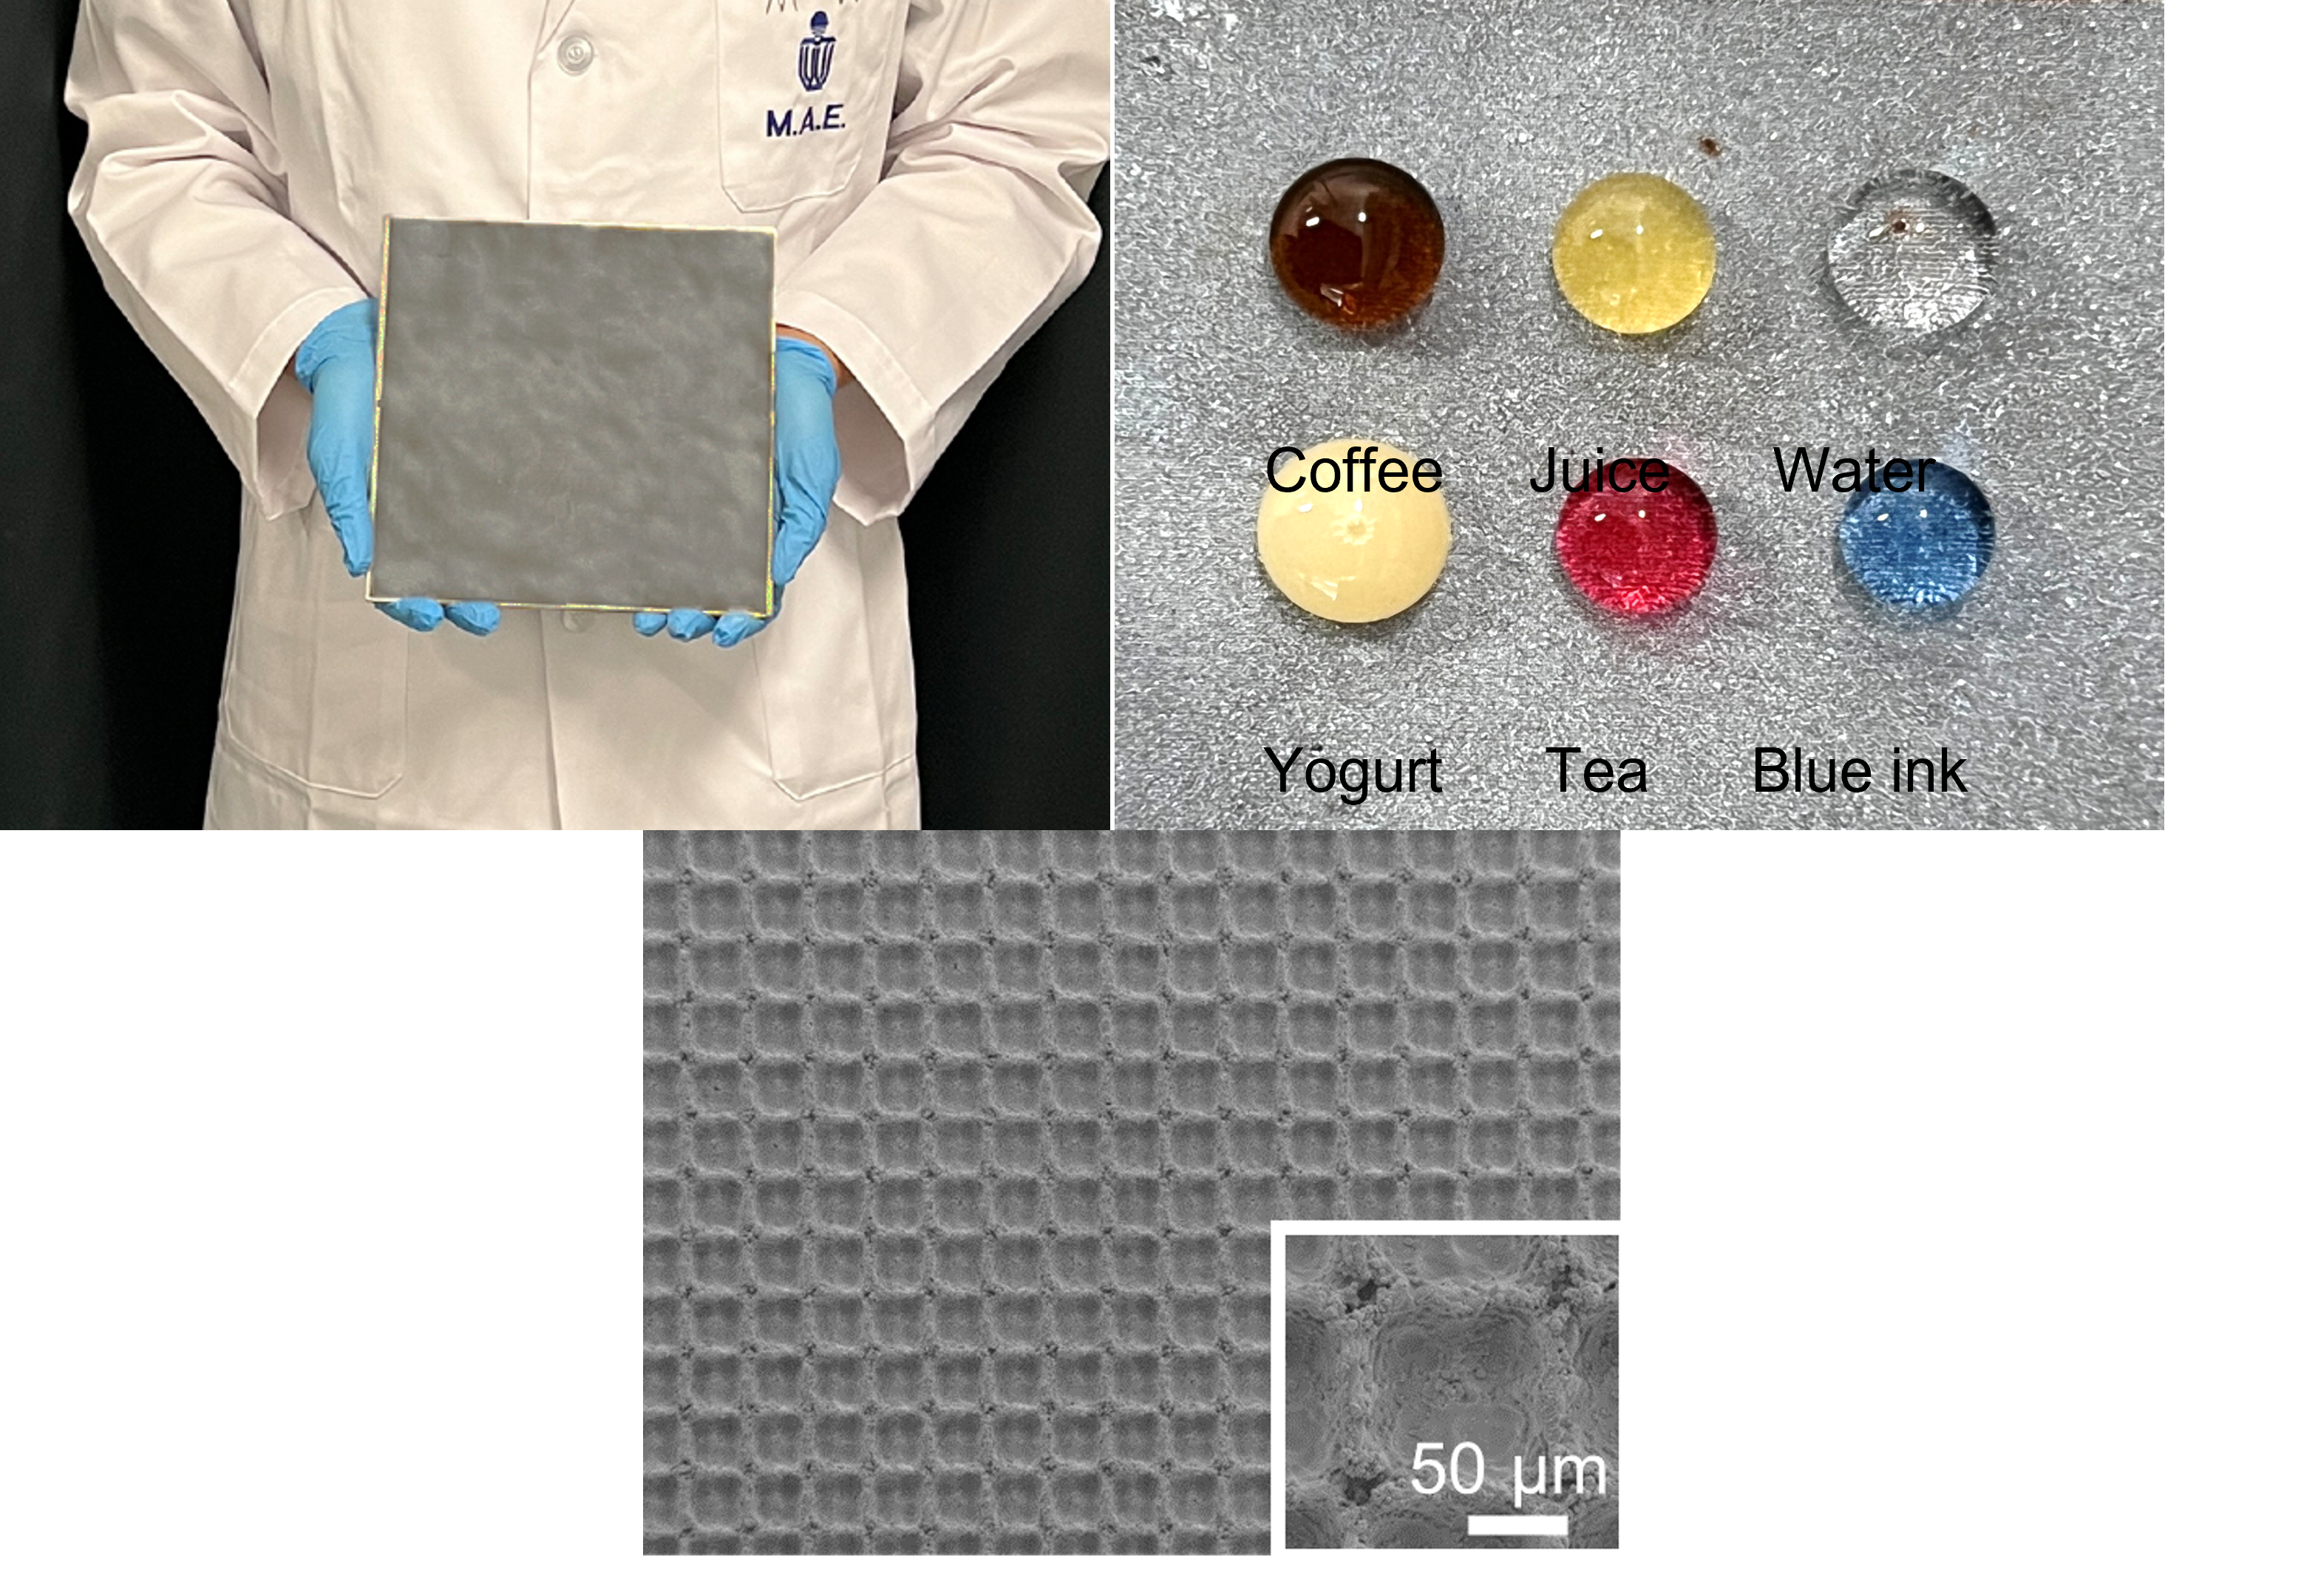 The upper-row images of project 4 demonstrate the superhydrophobic nature of the new material, where different liquid droplets stay unattached to.  The microscopic picture in the lower row shows the unique features of that material.